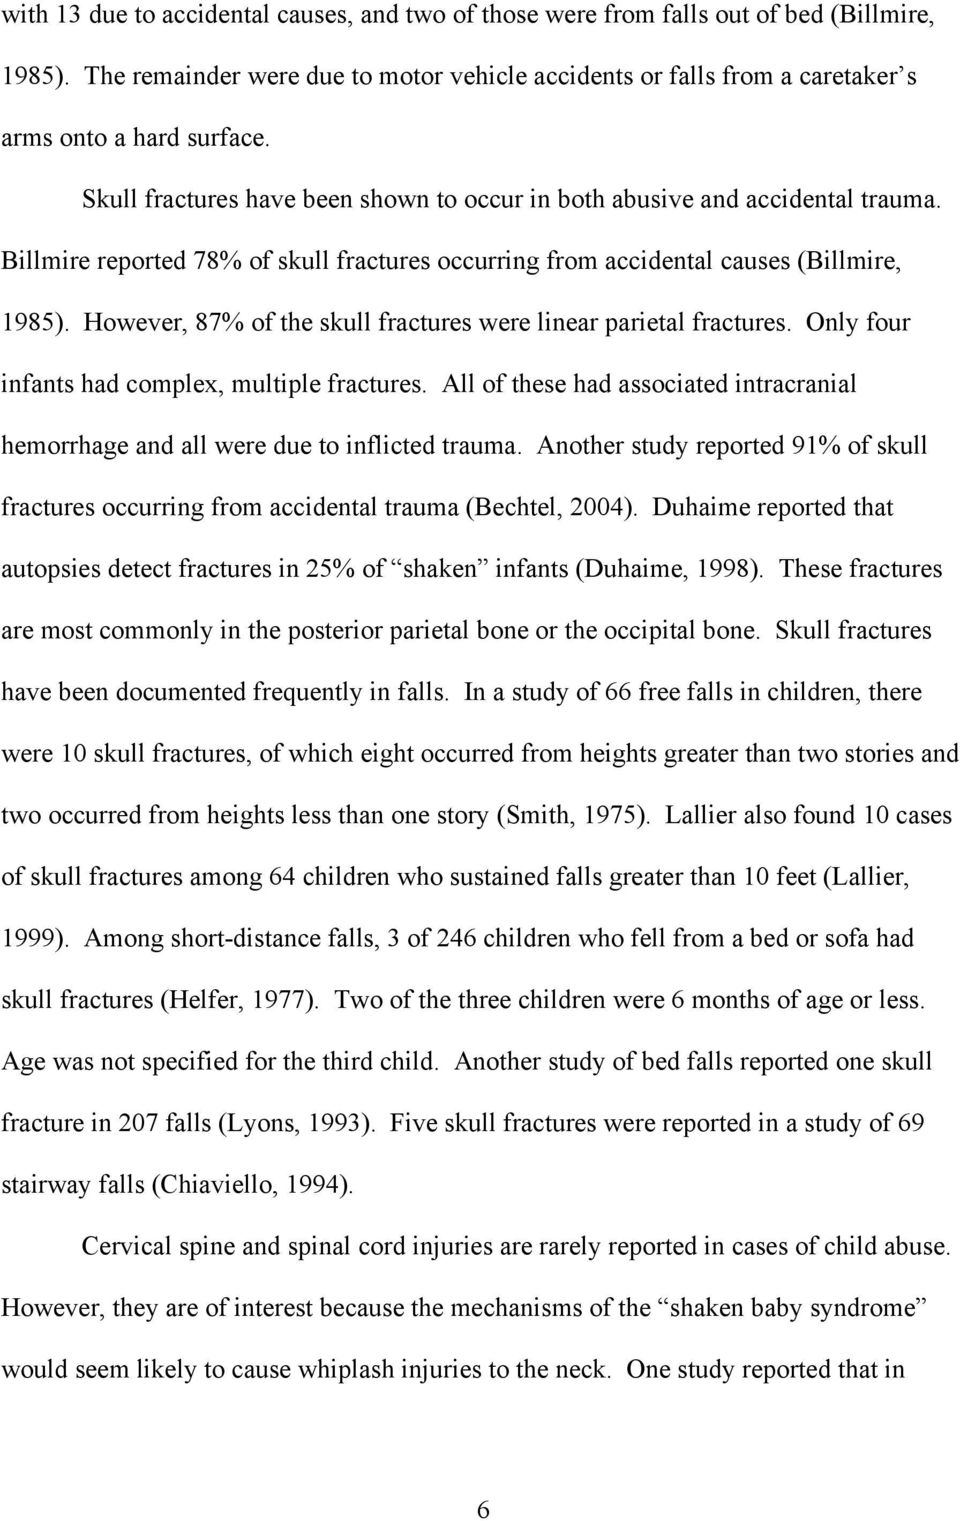 However, 87% of the skull fractures were linear parietal fractures. Only four infants had complex, multiple fractures.